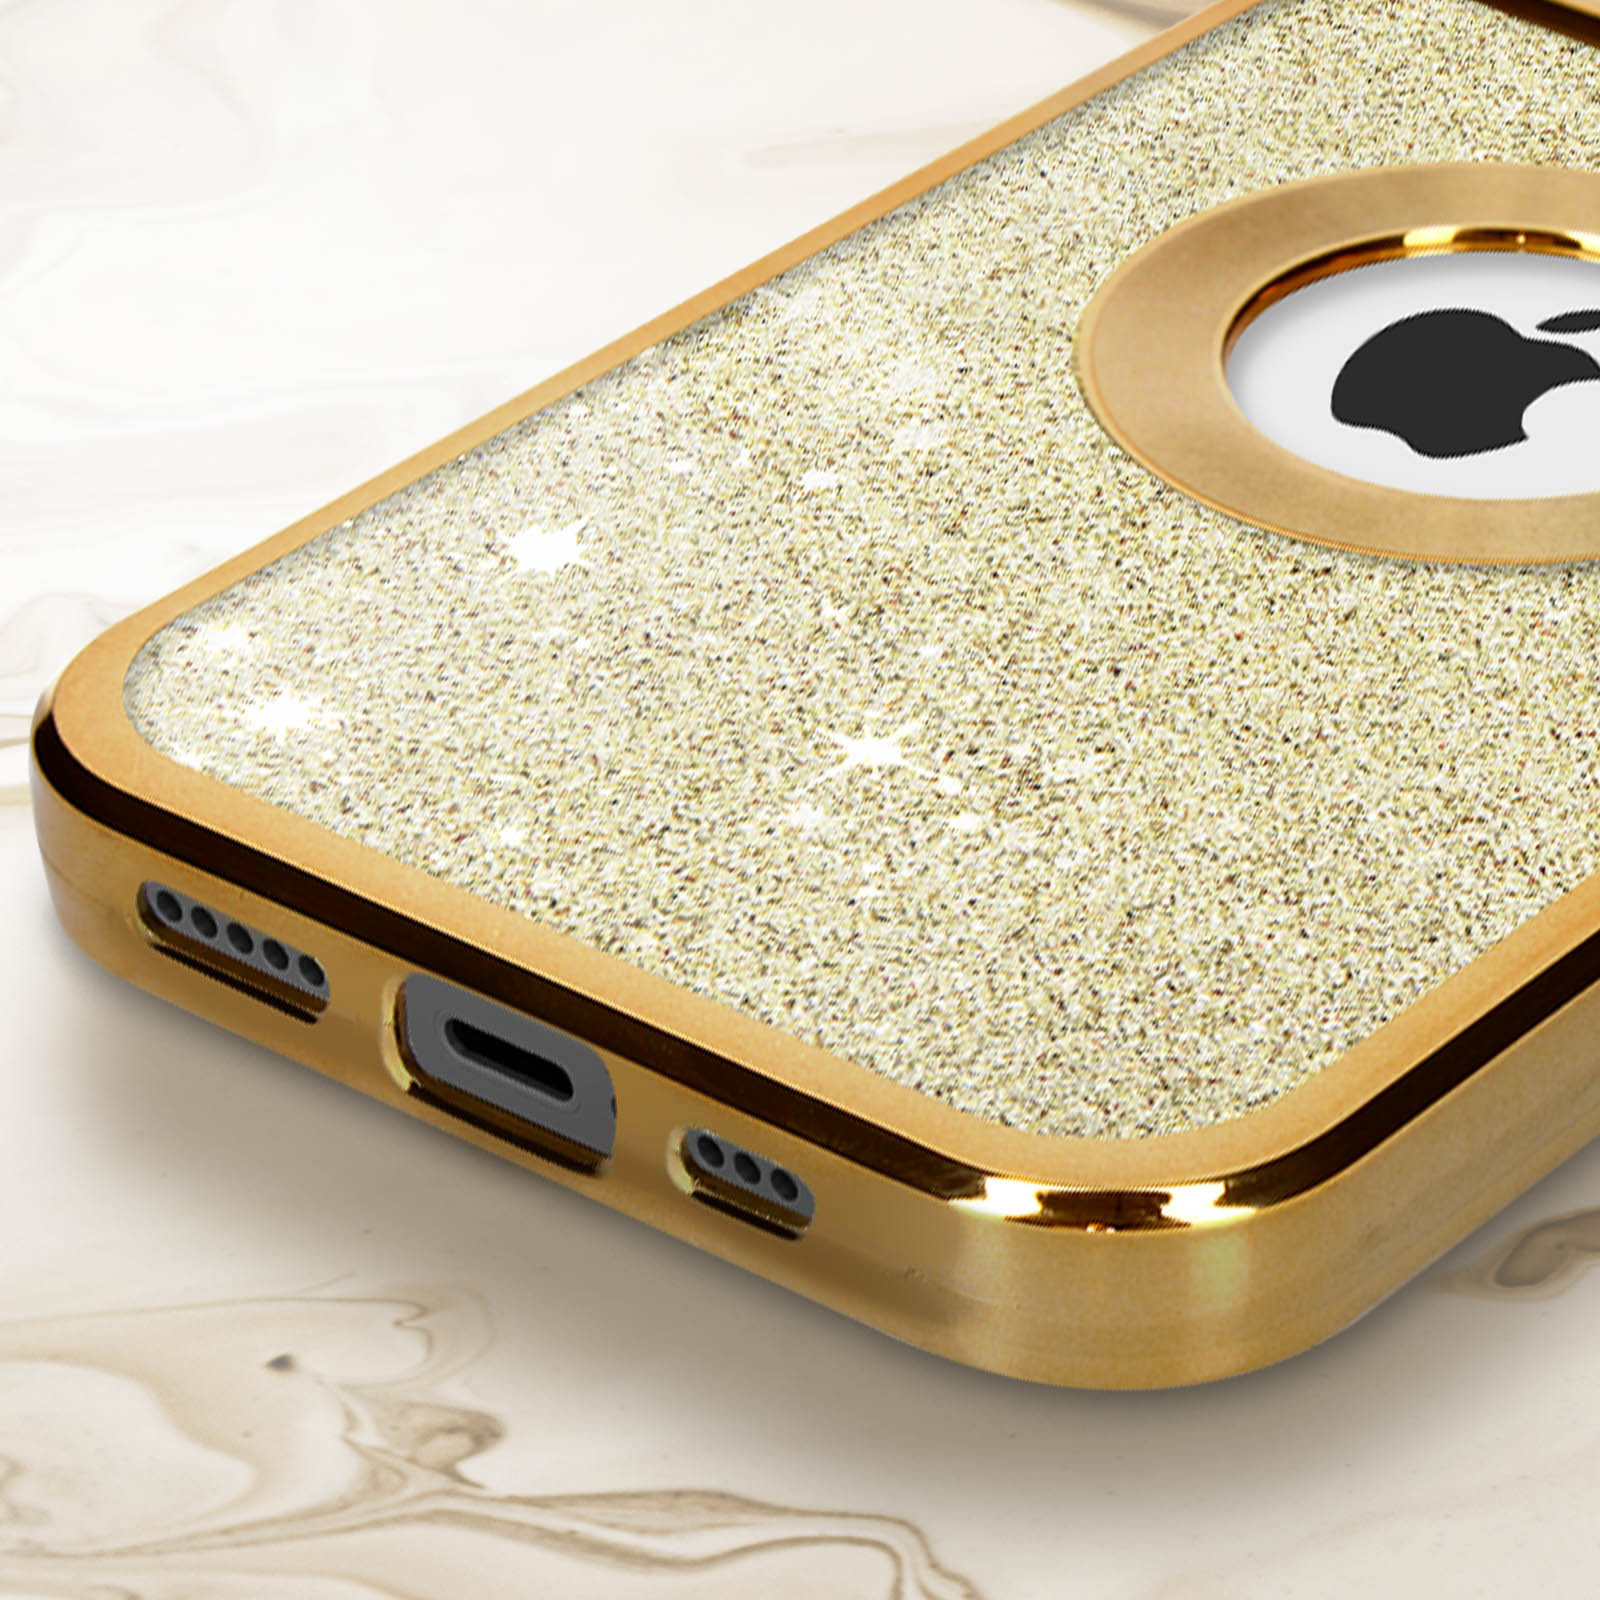 Gold Pro Spark Backcover, Protecam Series, Apple, 12 Max, AVIZAR iPhone